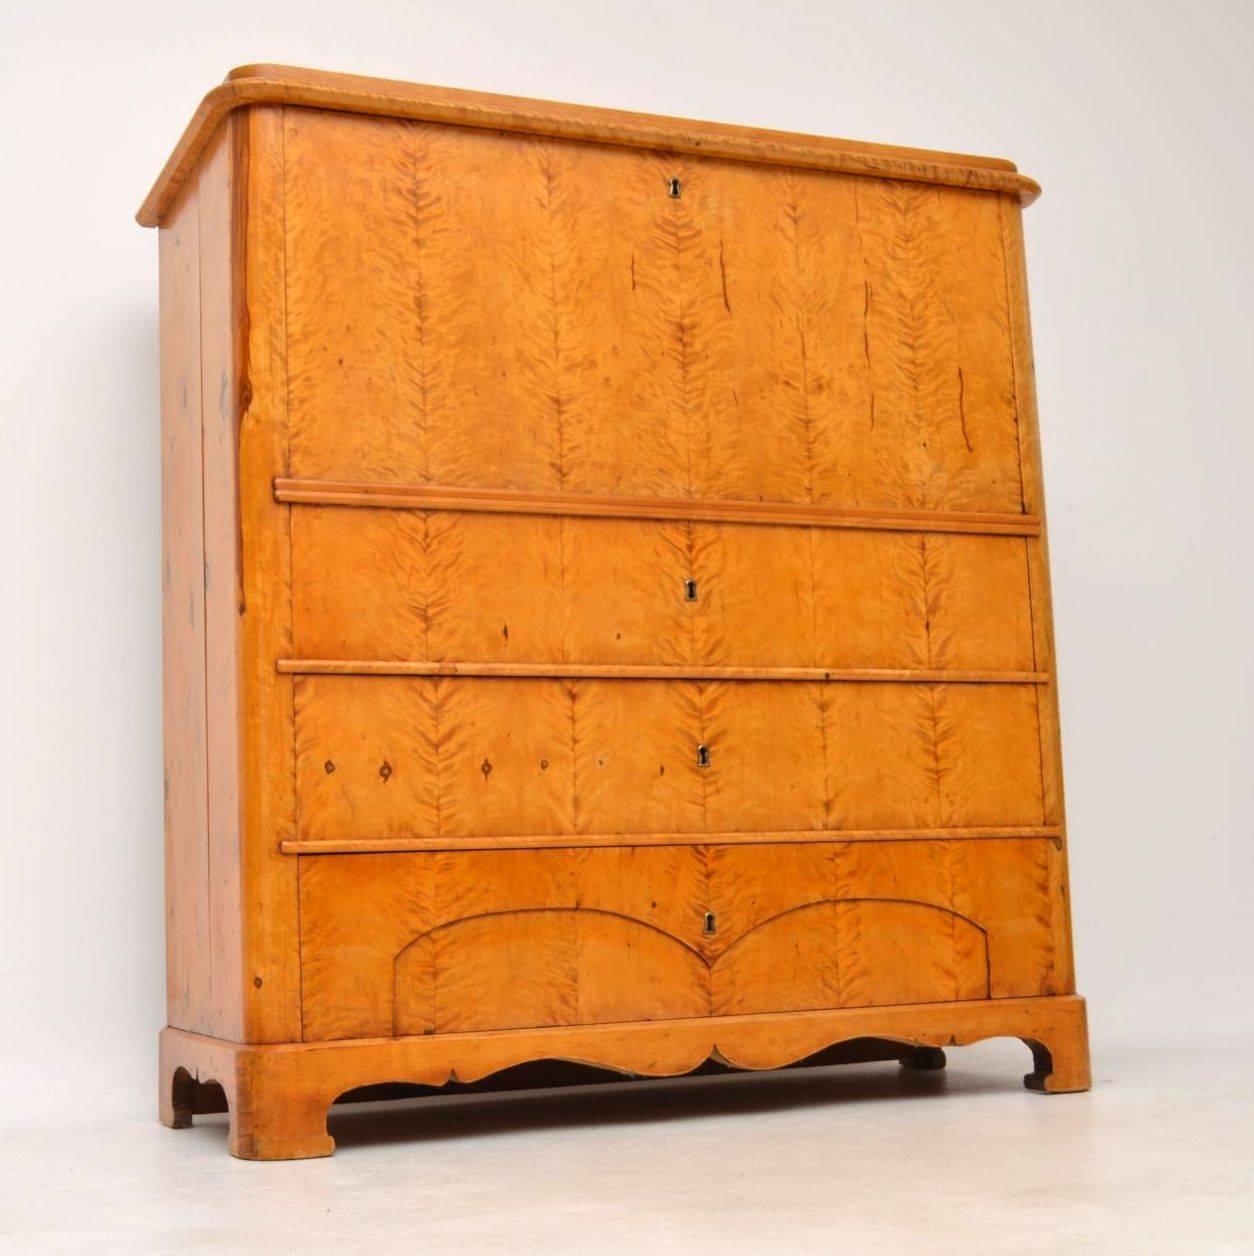 This antique Swedish Biedermeier satin birch secrétaire chest has a wonderful original blond color and it has one of the nicest interiors I’ve ever seen. I would date it to circa 1850-1860s period & it’s in excellent original condition. When